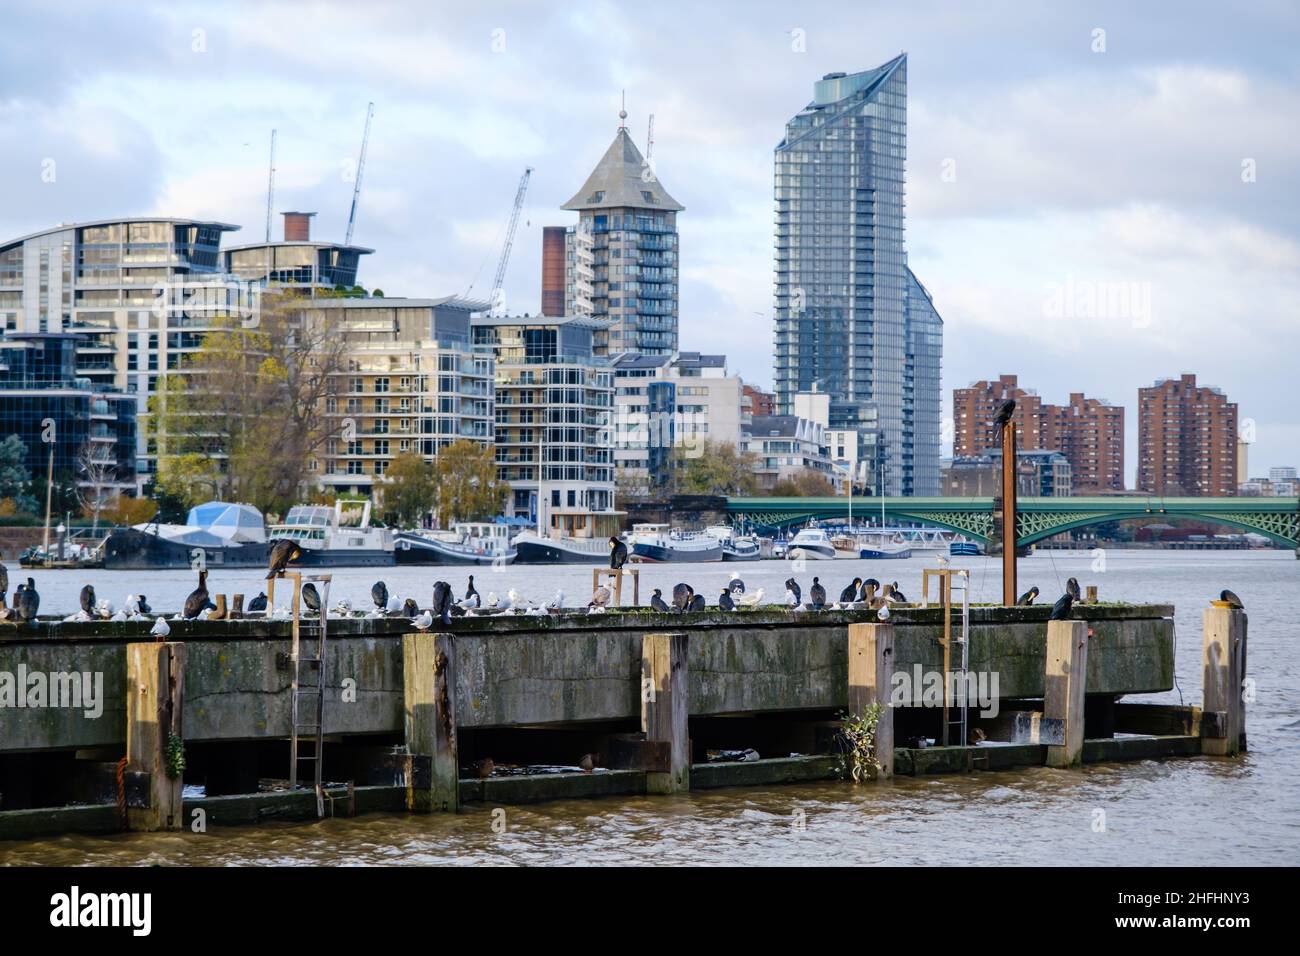 Cormorants, Seagulls and Ducks rest on a jetty in the Thames Stock Photo